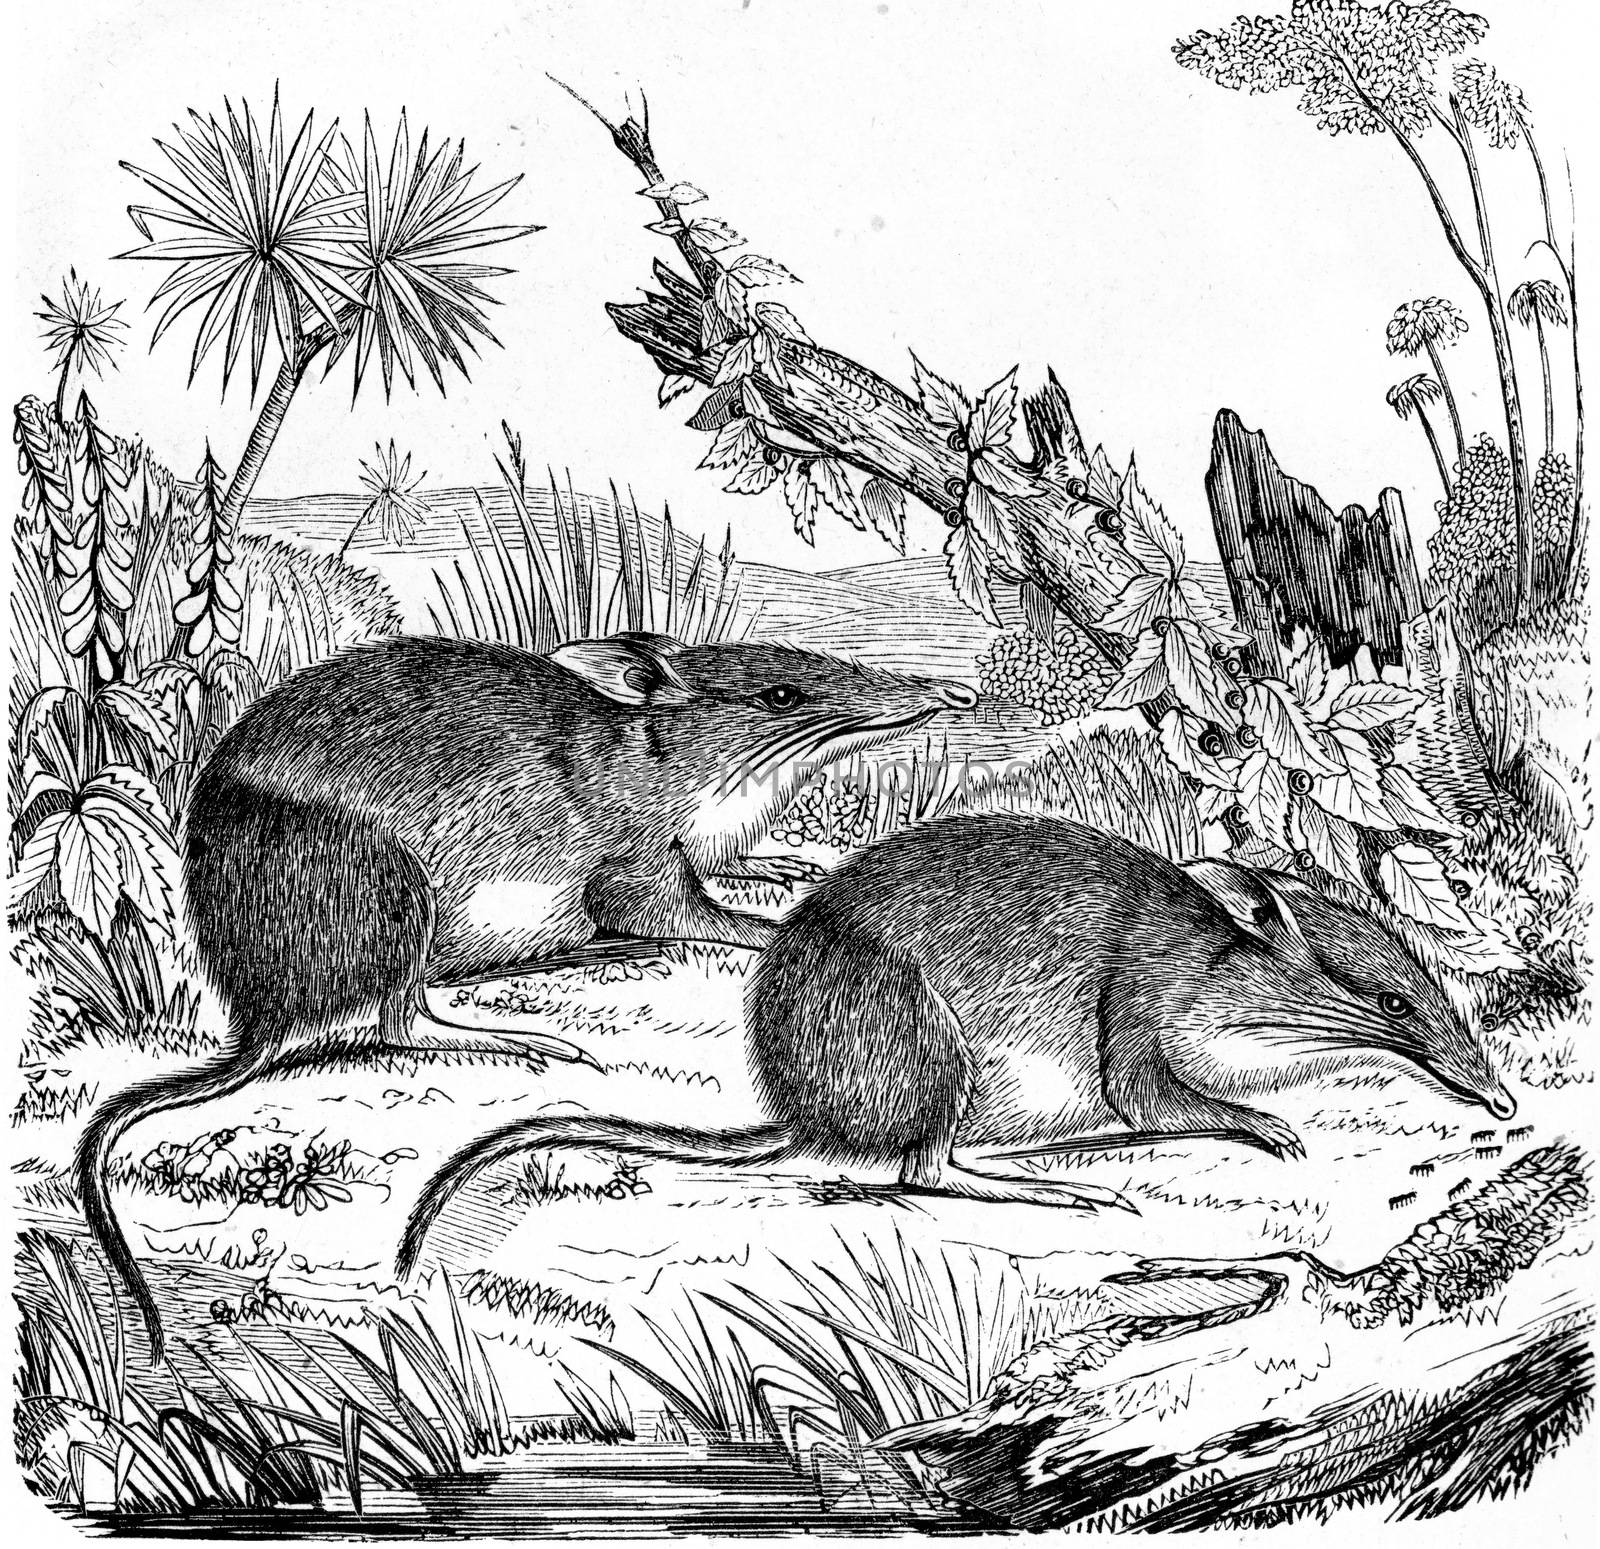 Greater bilby, vintage engraved illustration. From Zoology Elements from Paul Gervais.
